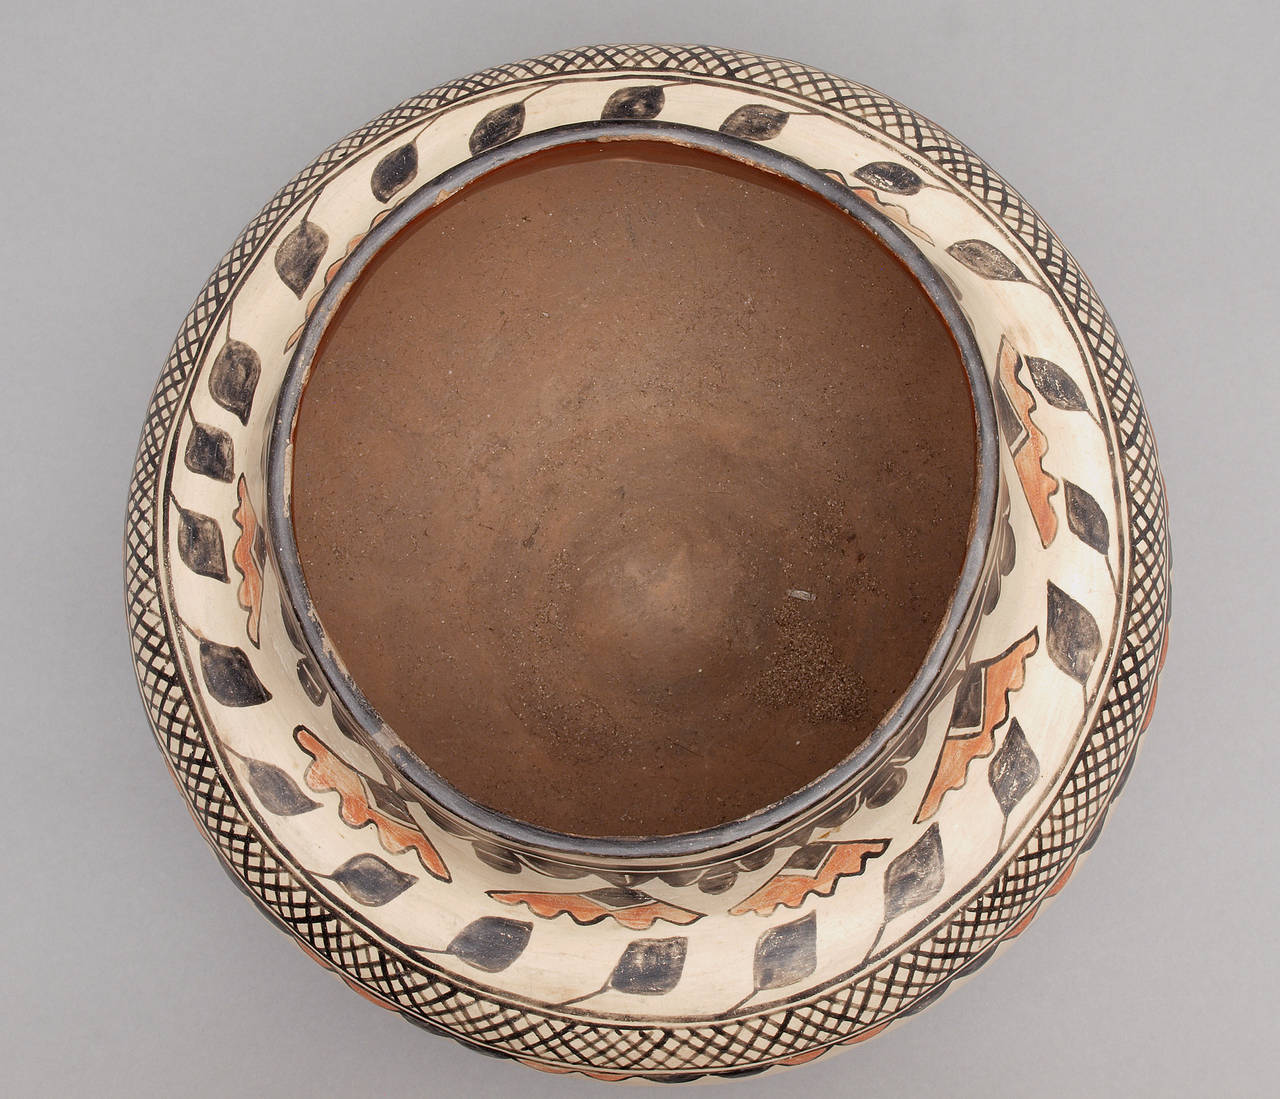 An intricately painted polychrome olla.  Created at San Ildefonso Pueblo, the design is consistent with the work of Martina and Florentino and is very similar to work by Martina's mother, Tonia Peña Vigil.

The stone polished slip, red band on